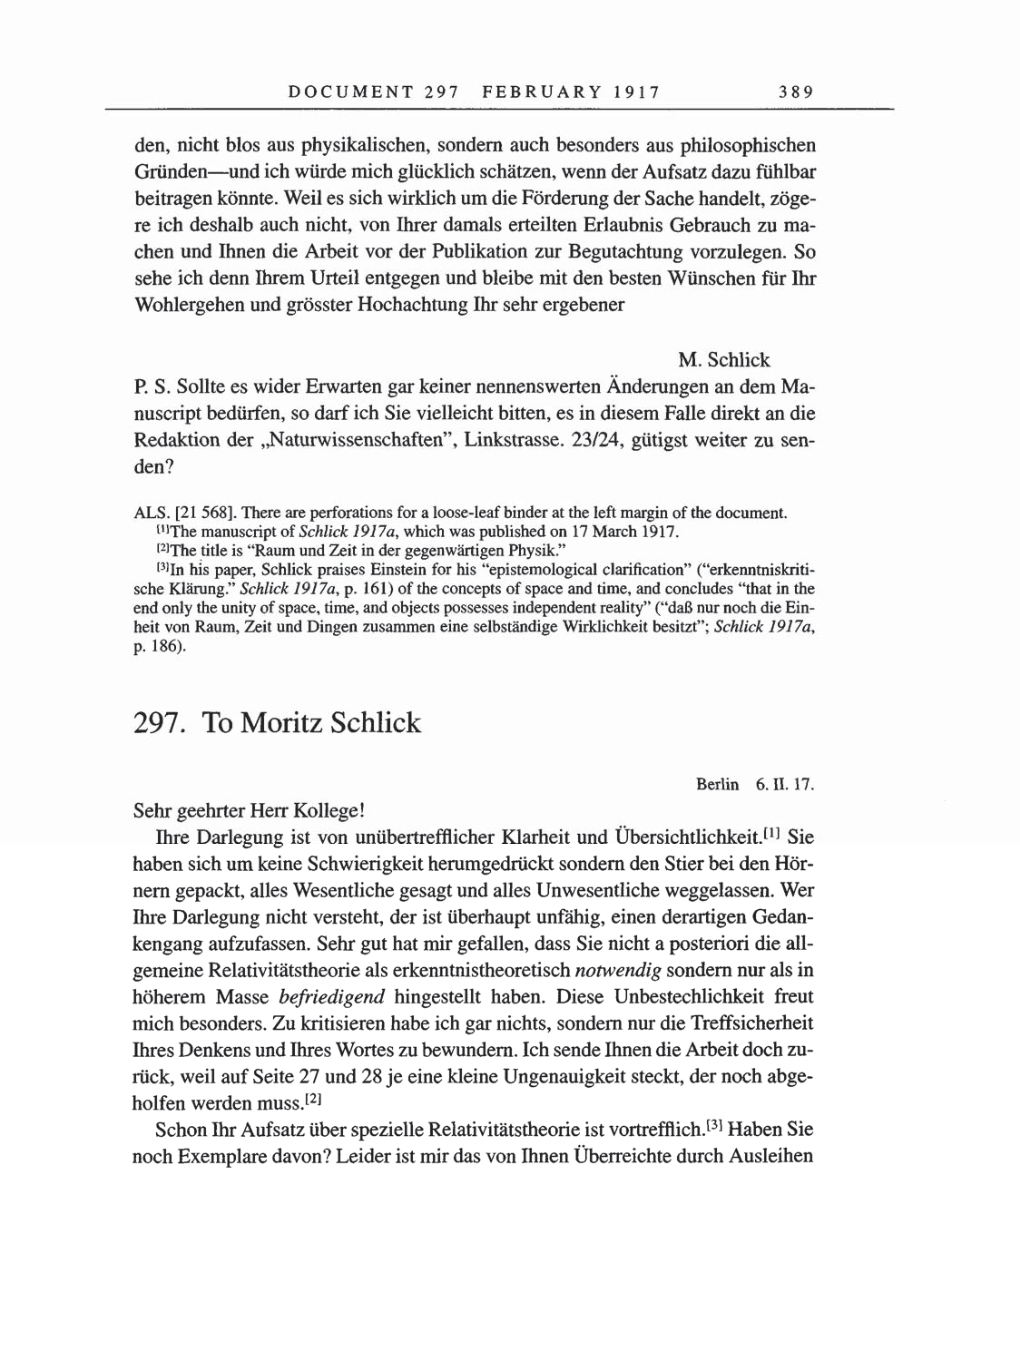 Volume 8, Part A: The Berlin Years: Correspondence 1914-1917 page 389